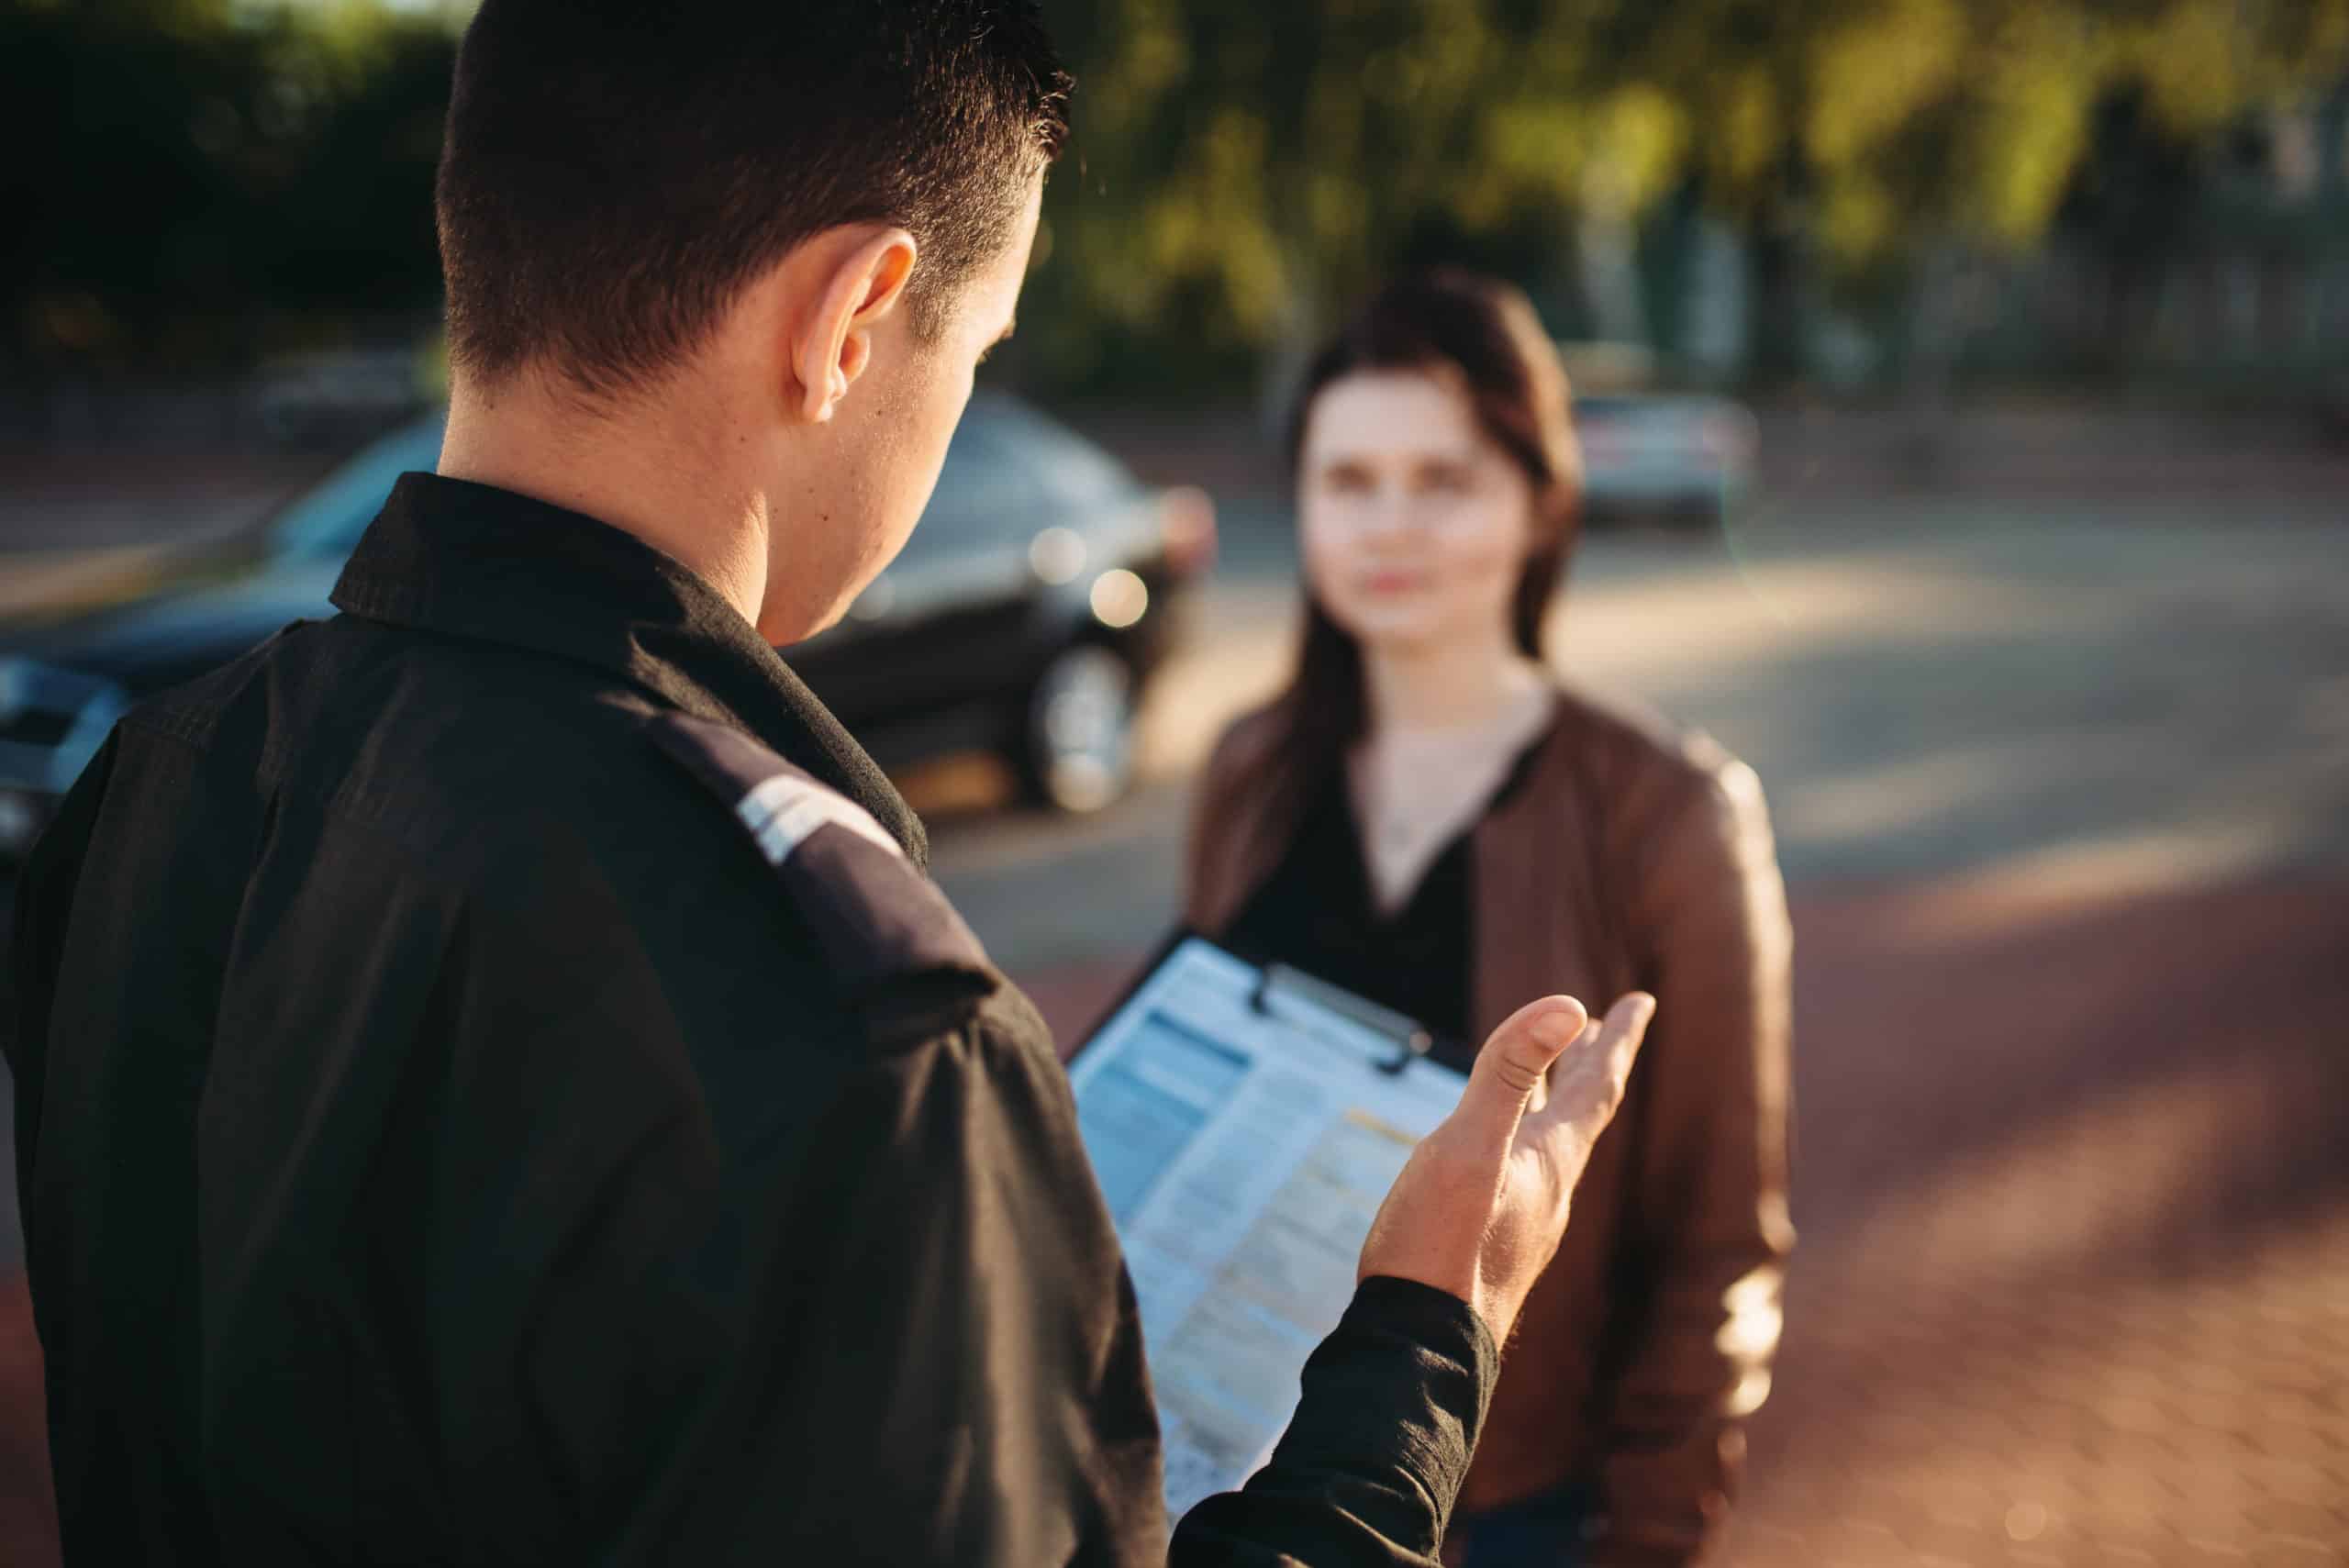 Police officers in uniform reads law to female driver. Law protection, car traffic inspector, safety control job